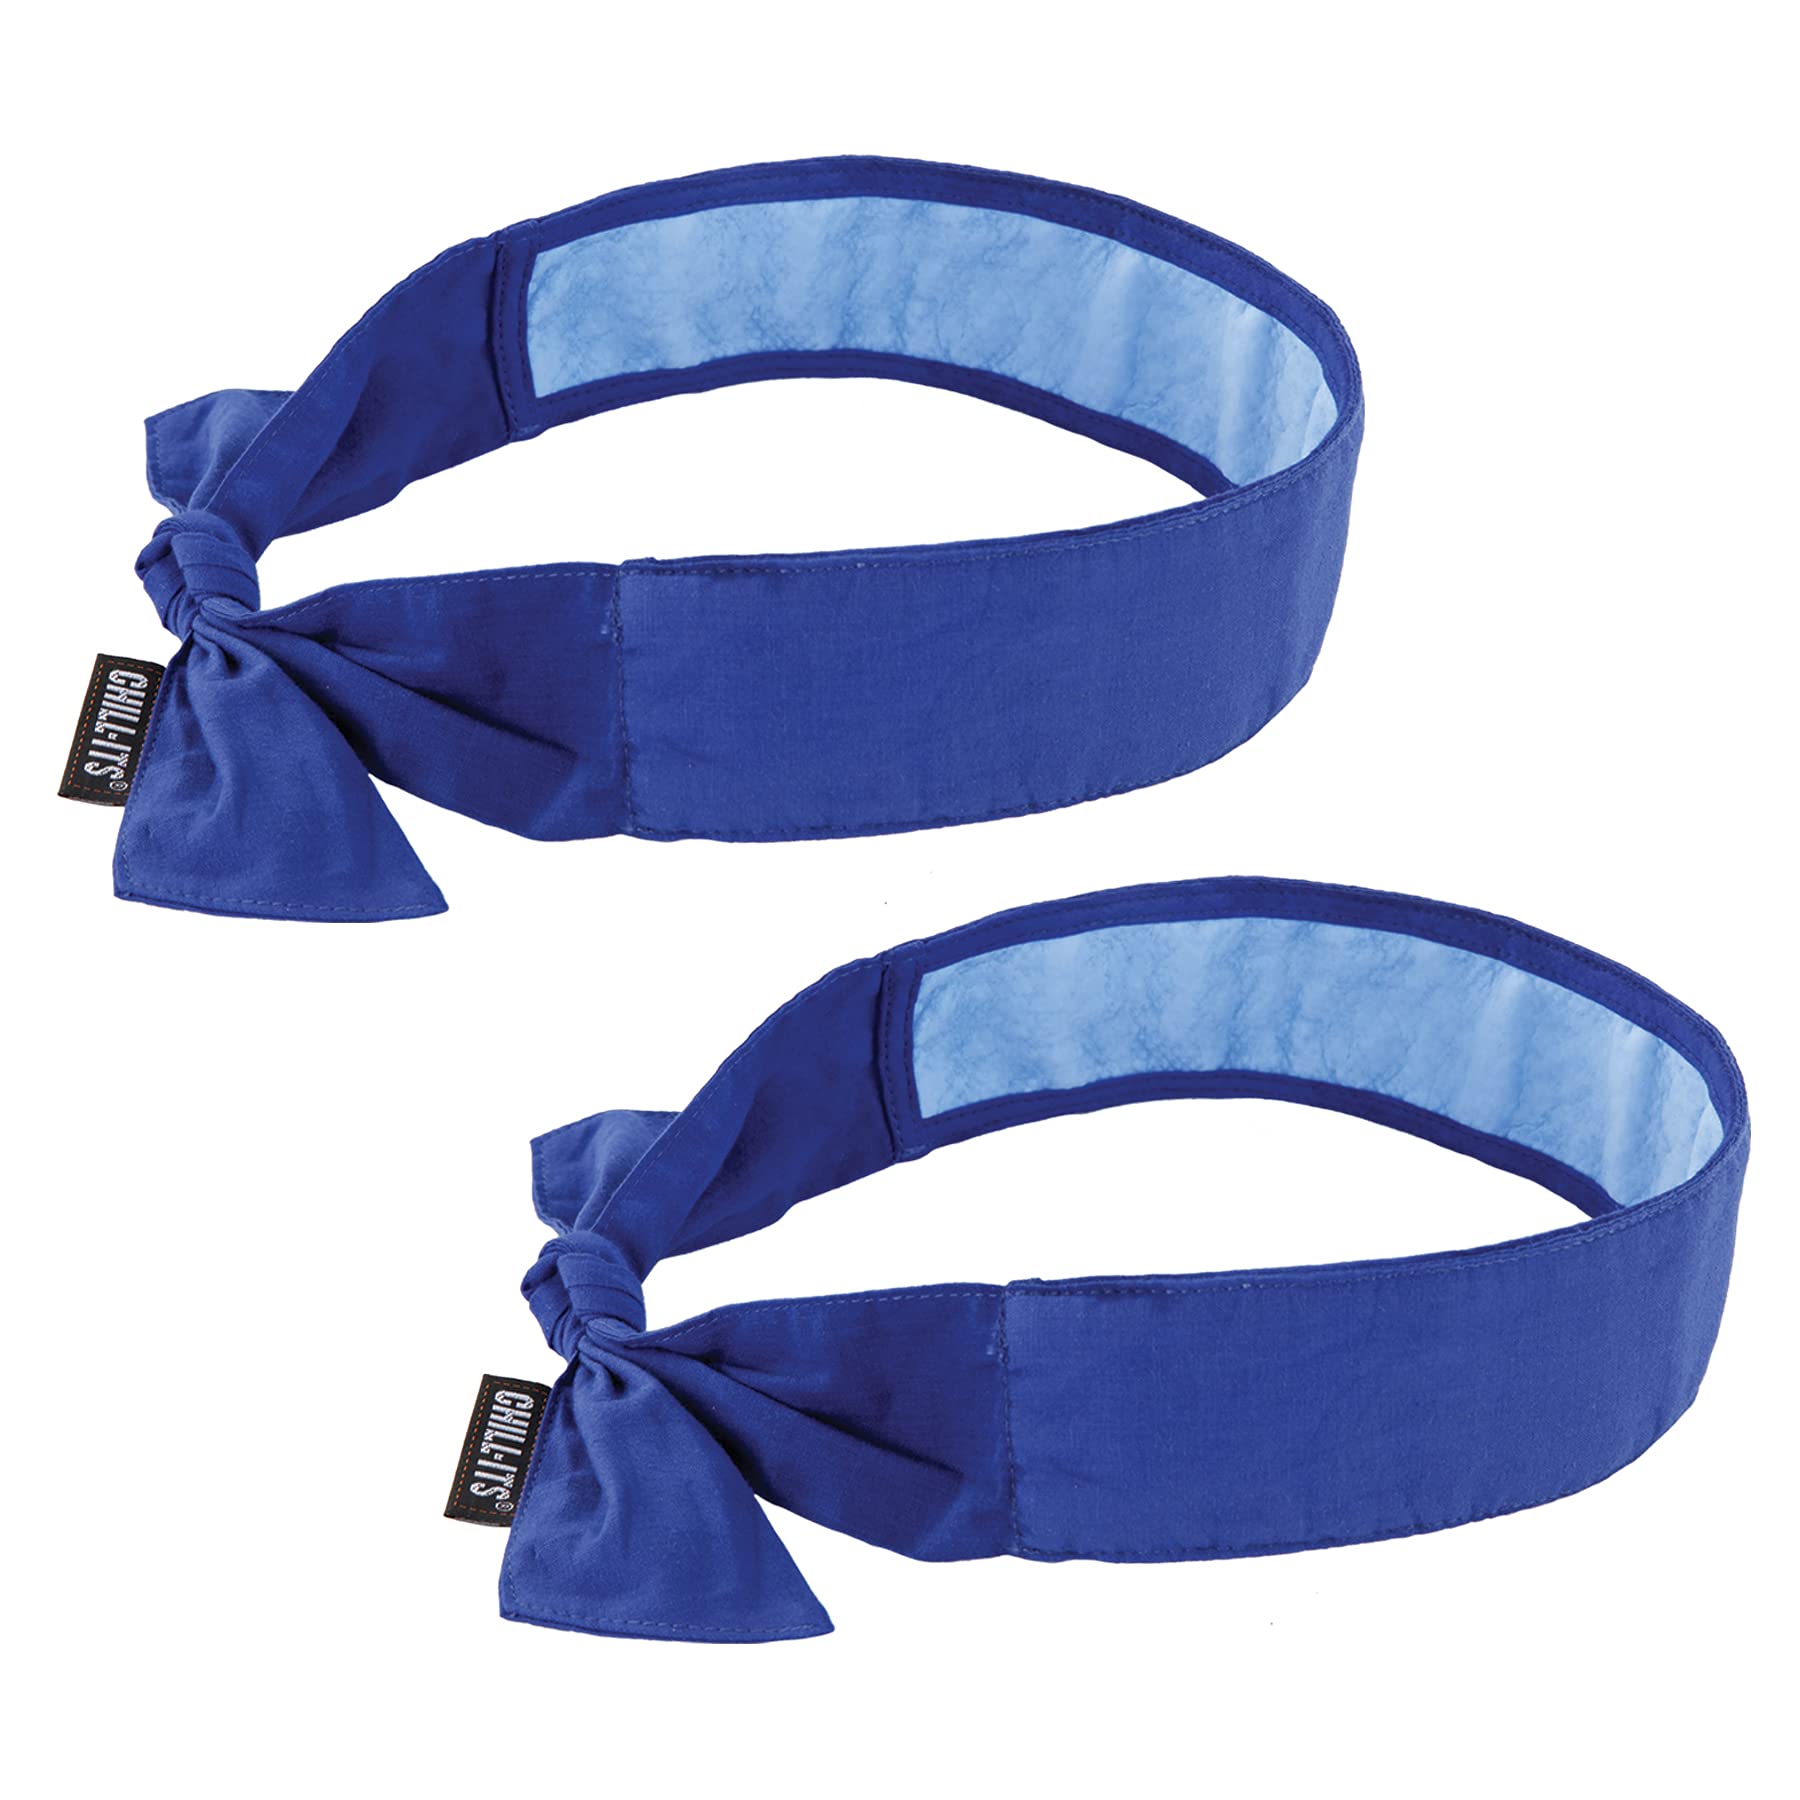 Ergodyne Chill Its 6700CT Cooling Bandana, Lined with Evaporative PVA Material for Fast Cooling Relief, Tie for Adjustable Fit, Blue, 2-Pack